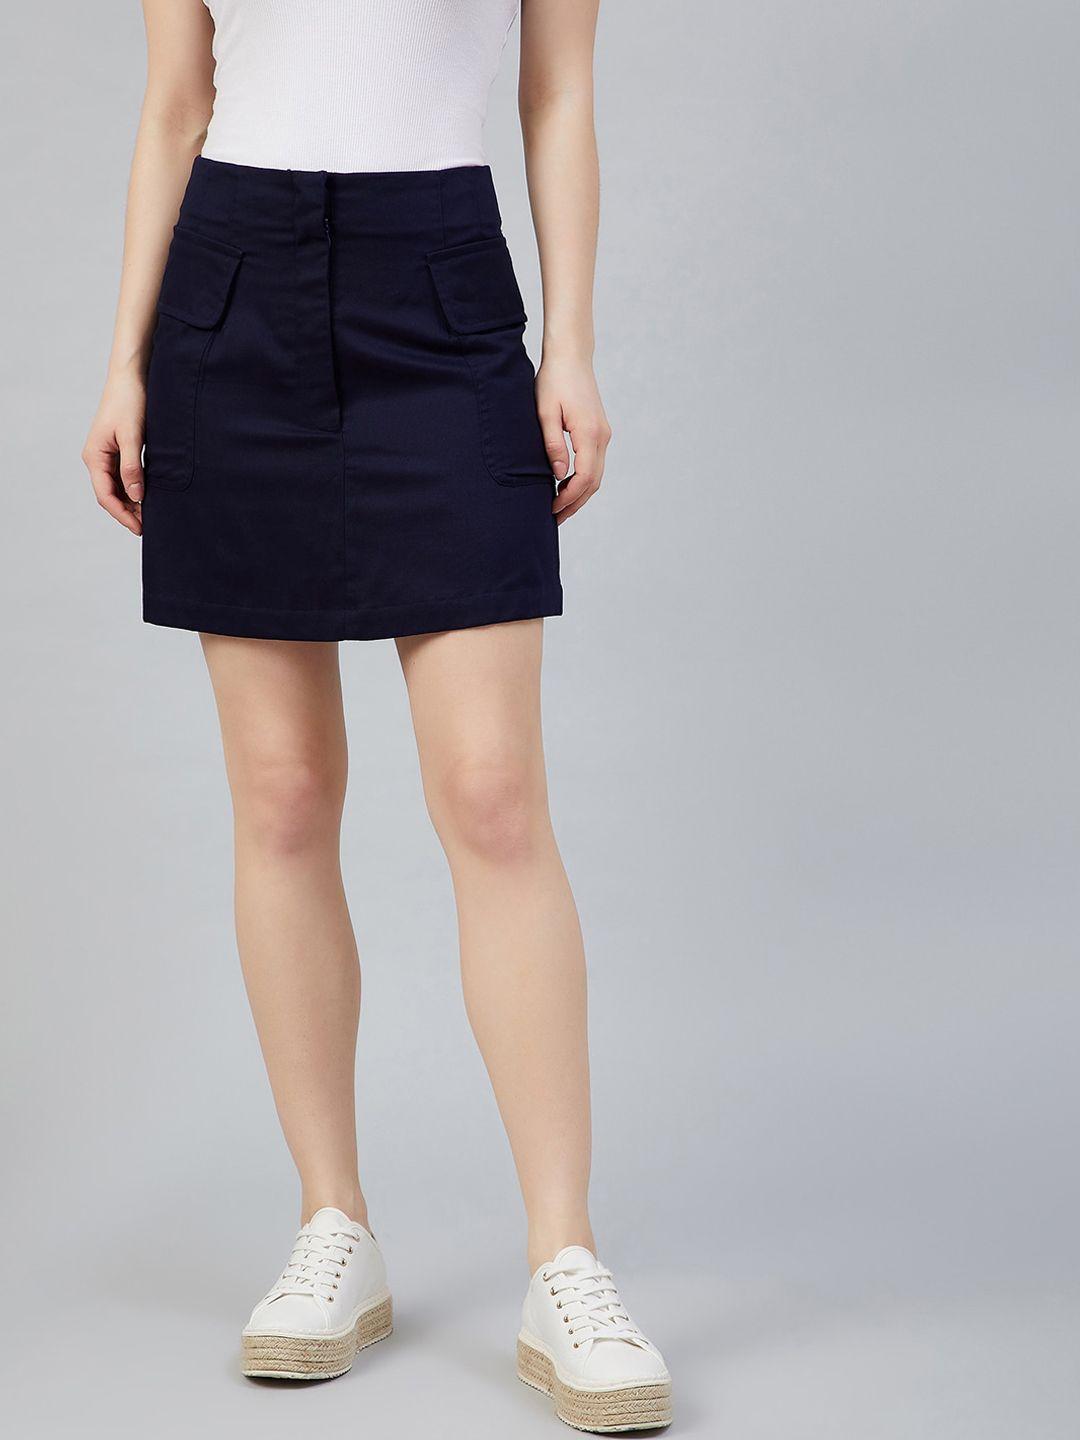 marie-claire-women-navy-blue-solid-straight-mini-skirt